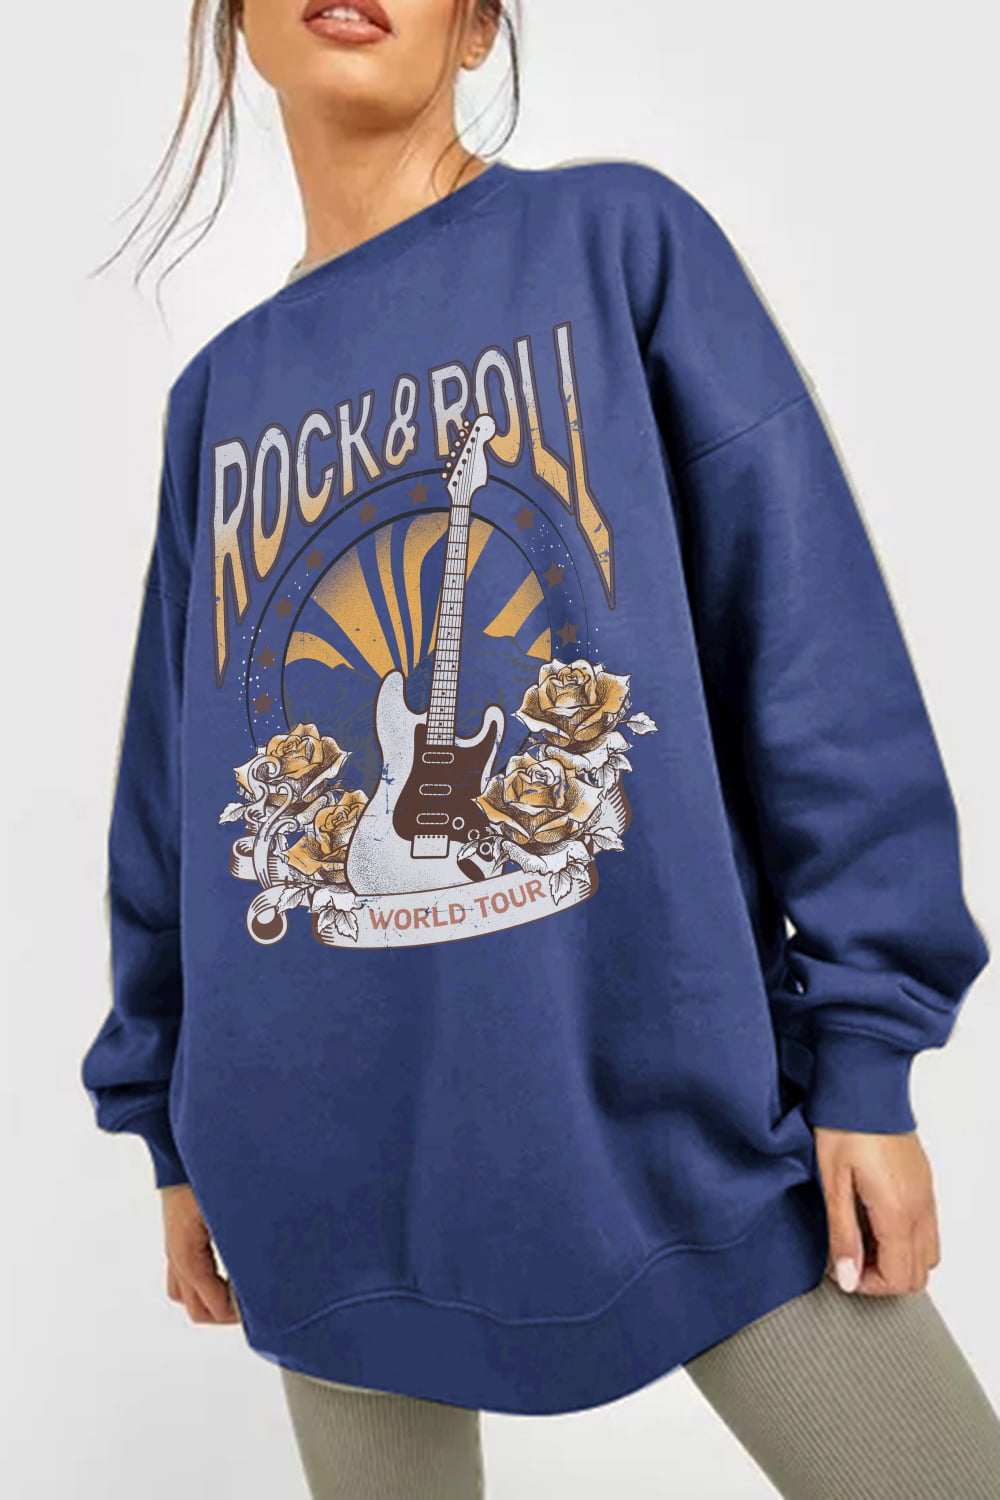 Simply Love Simply Love Full Size ROCK & ROLL WORLD TOUR Graphic Sweatshirt